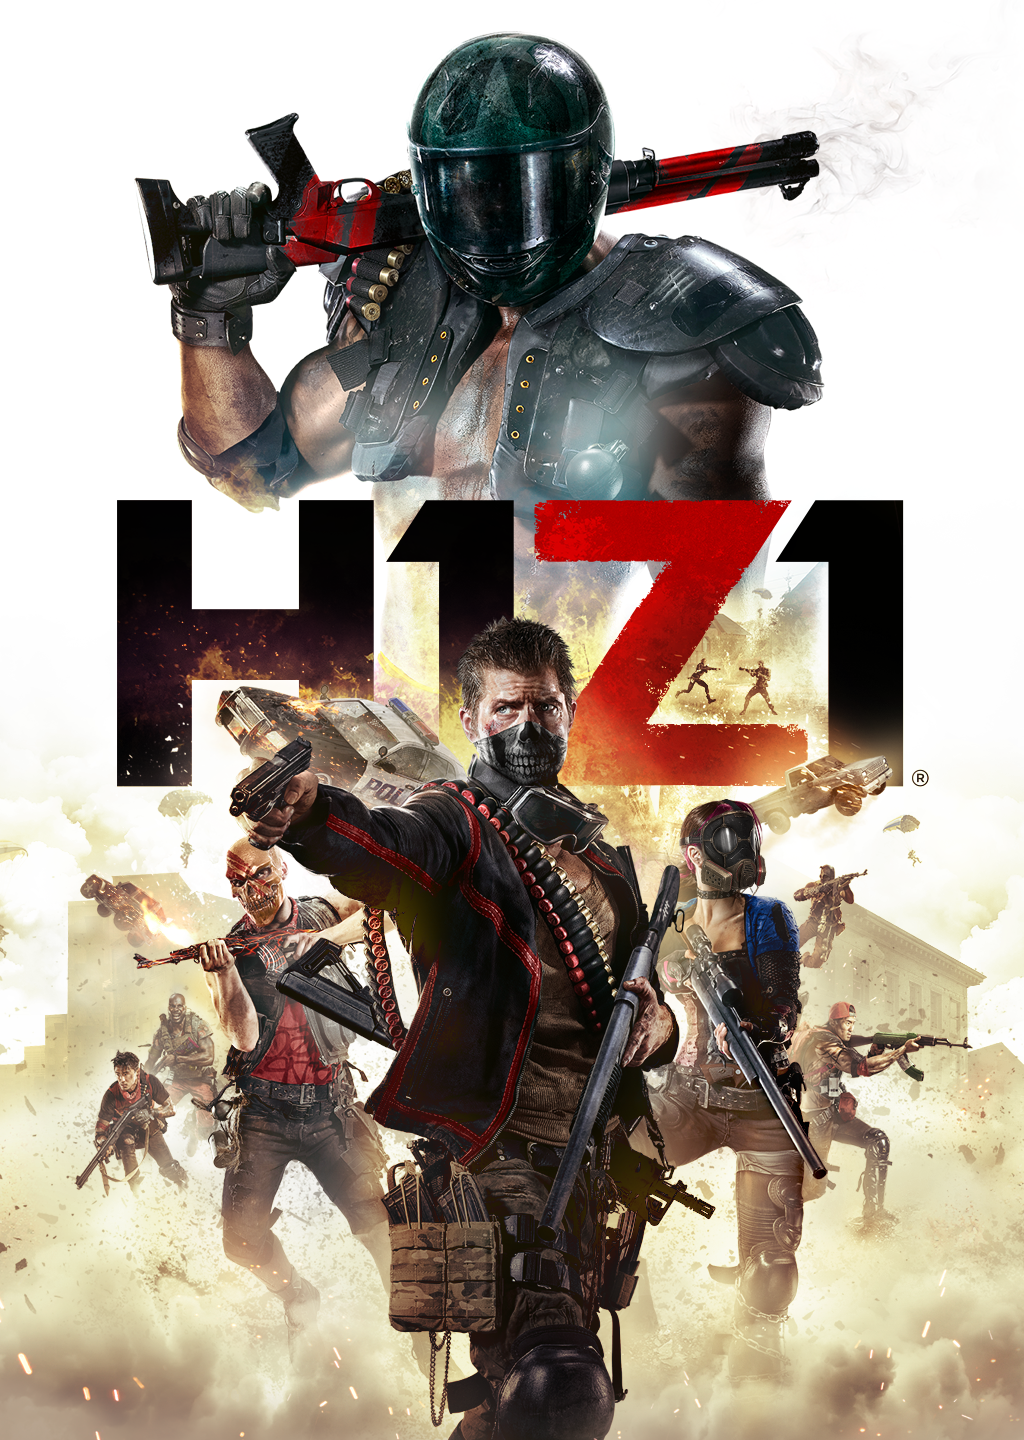 H1z1 Xbox One Release Date